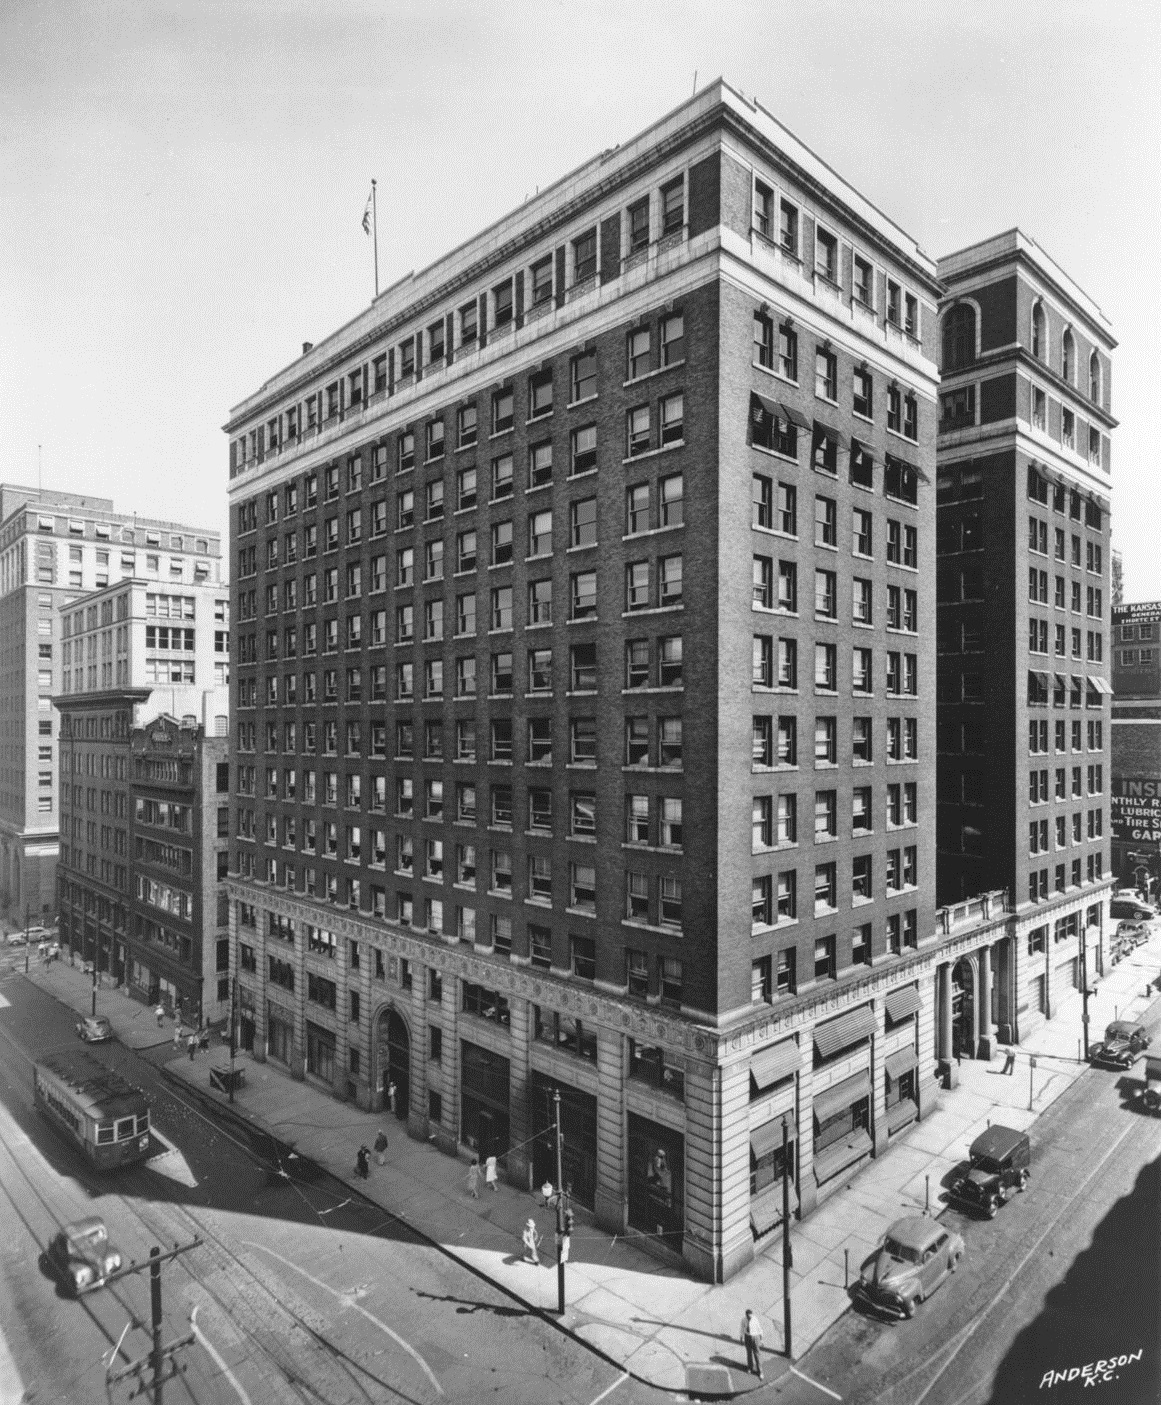 Kansas City Board of Trave building